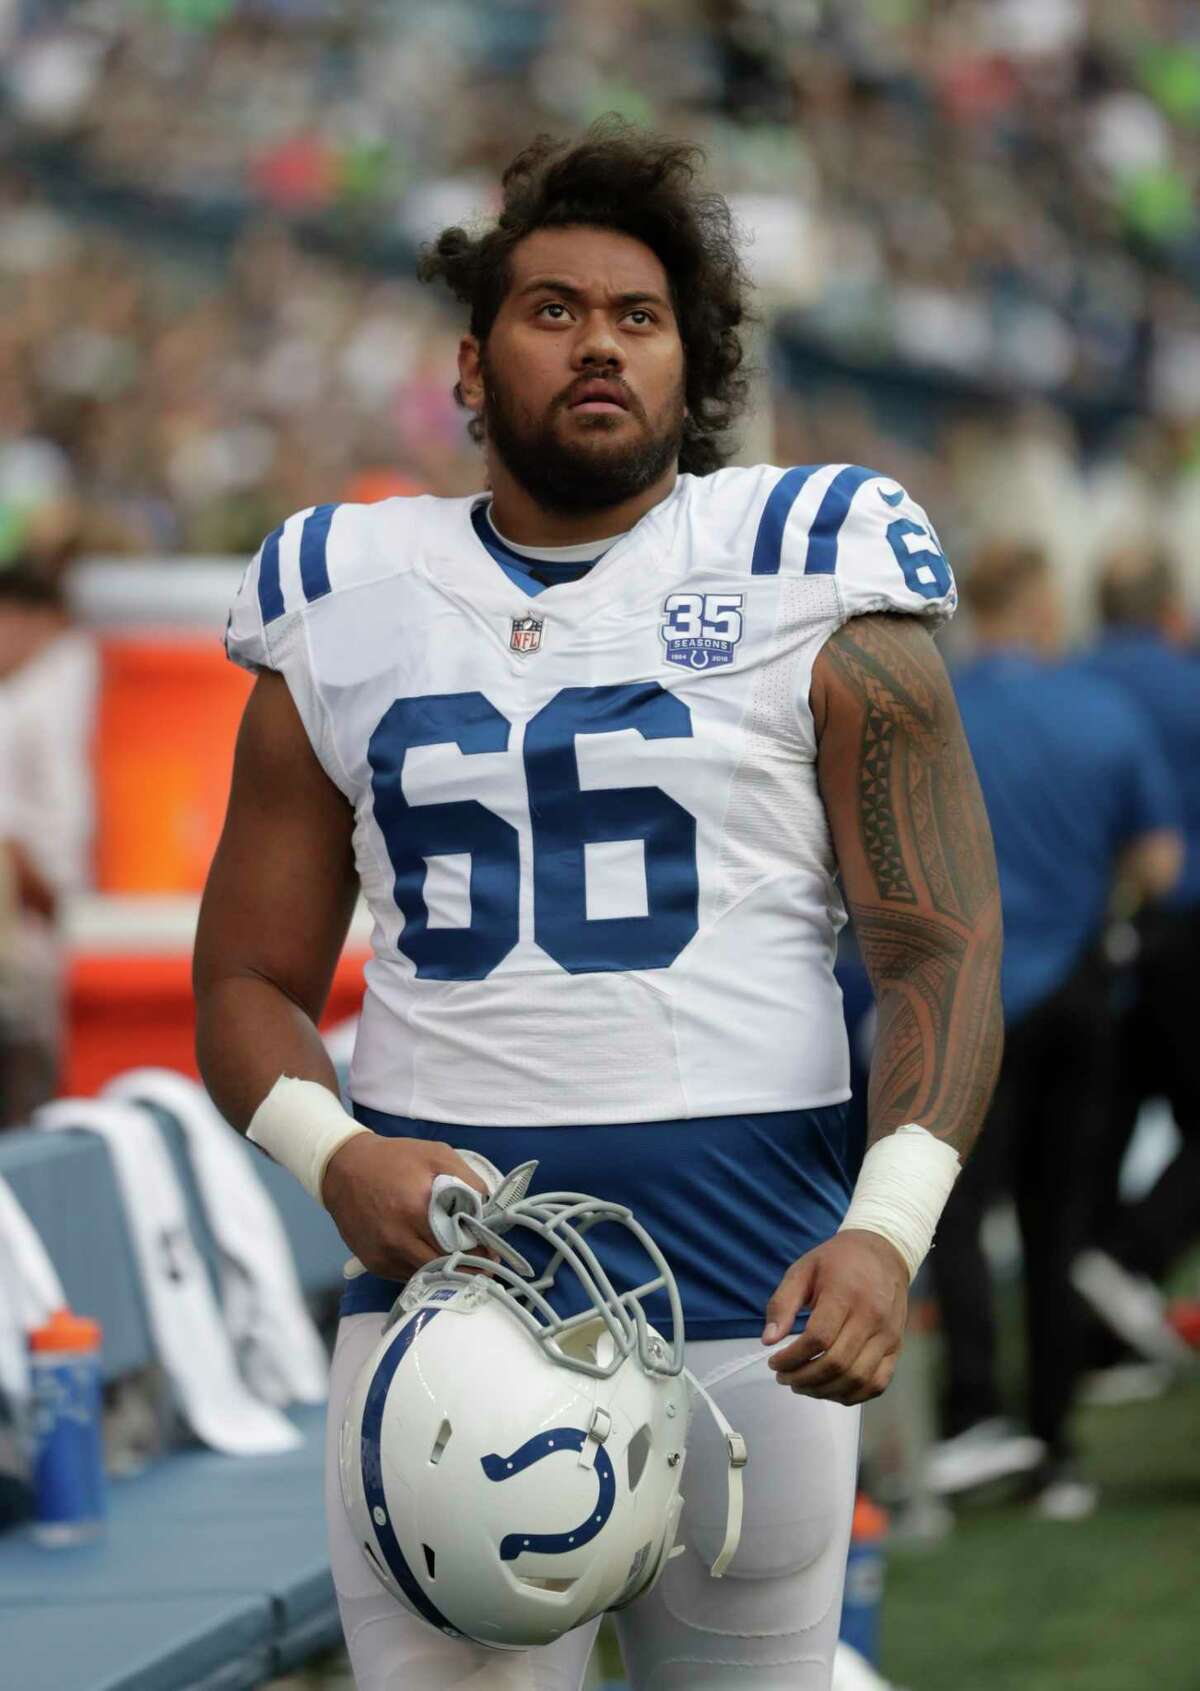 Indianapolis Colts defensive tackle Tomasi Laulile stands on the sideline before an NFL football preseason game against the Seattle Seahawks, Thursday, Aug. 9, 2018, in Seattle. (AP Photo/Stephen Brashear)